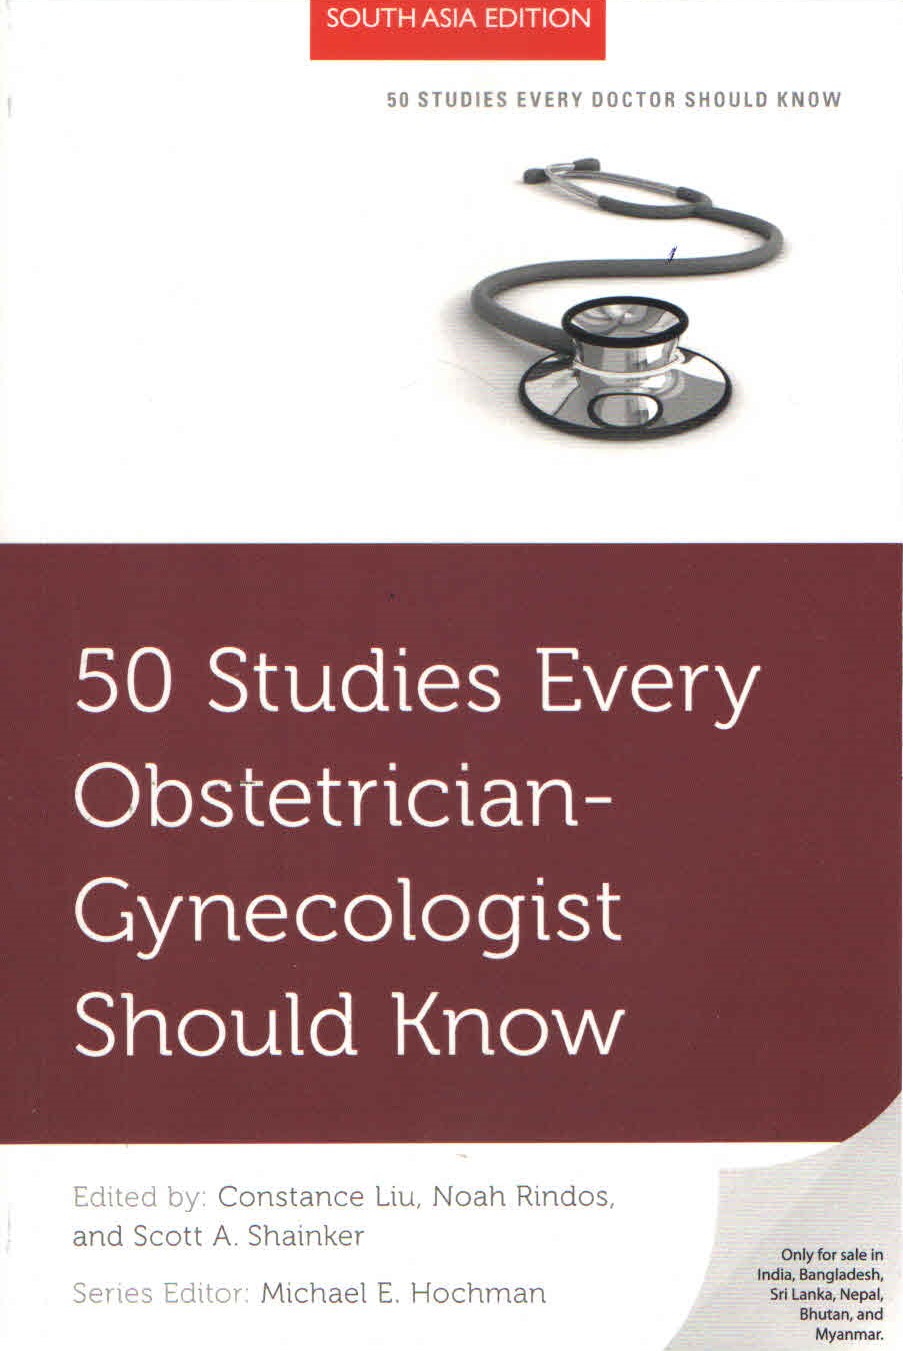 exclusive-publishers/oxford-university-press/50-studies-every-obstetrician-gynecologist-should-know-9780197775813